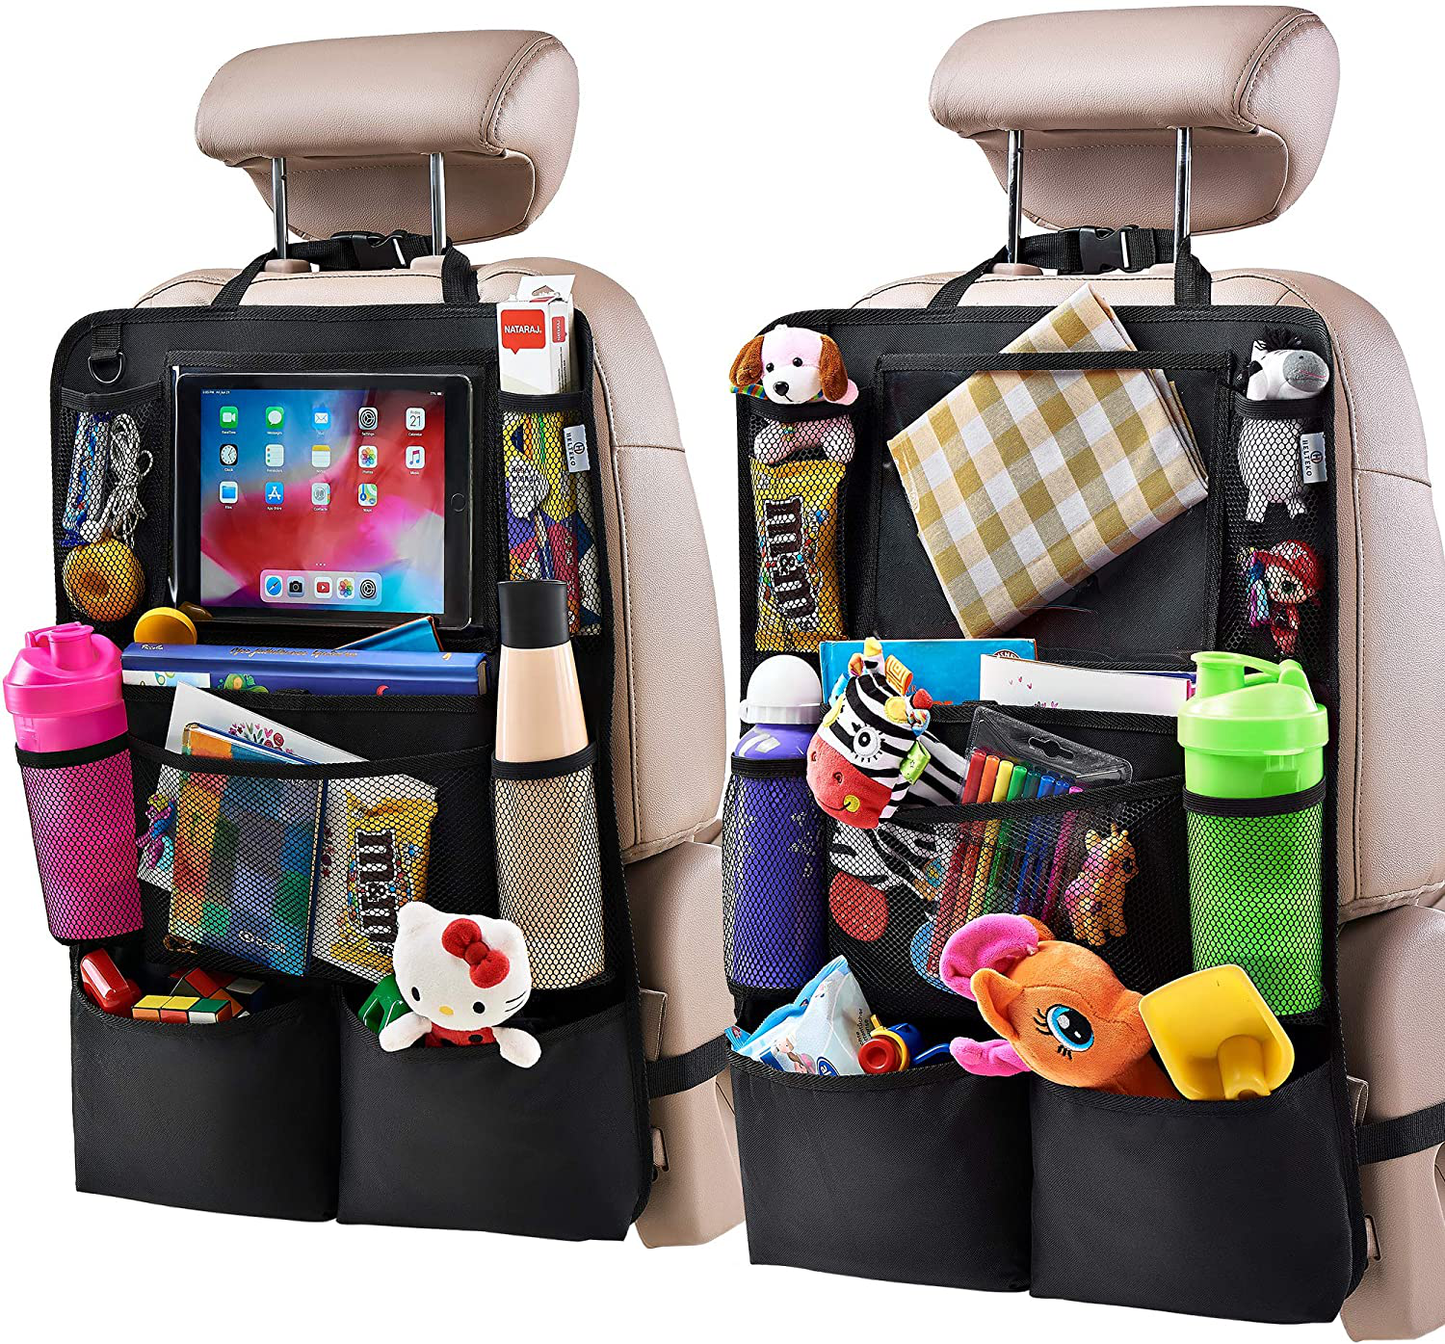 H Helteko Backseat Car Organizer, Kick Mats Back Seat Protector with Touch Screen Tablet Holder, Car Back Seat Organizer for Kids, Car Travel Accessories, Kick Mat with 9 Storage Pockets 2 Pack